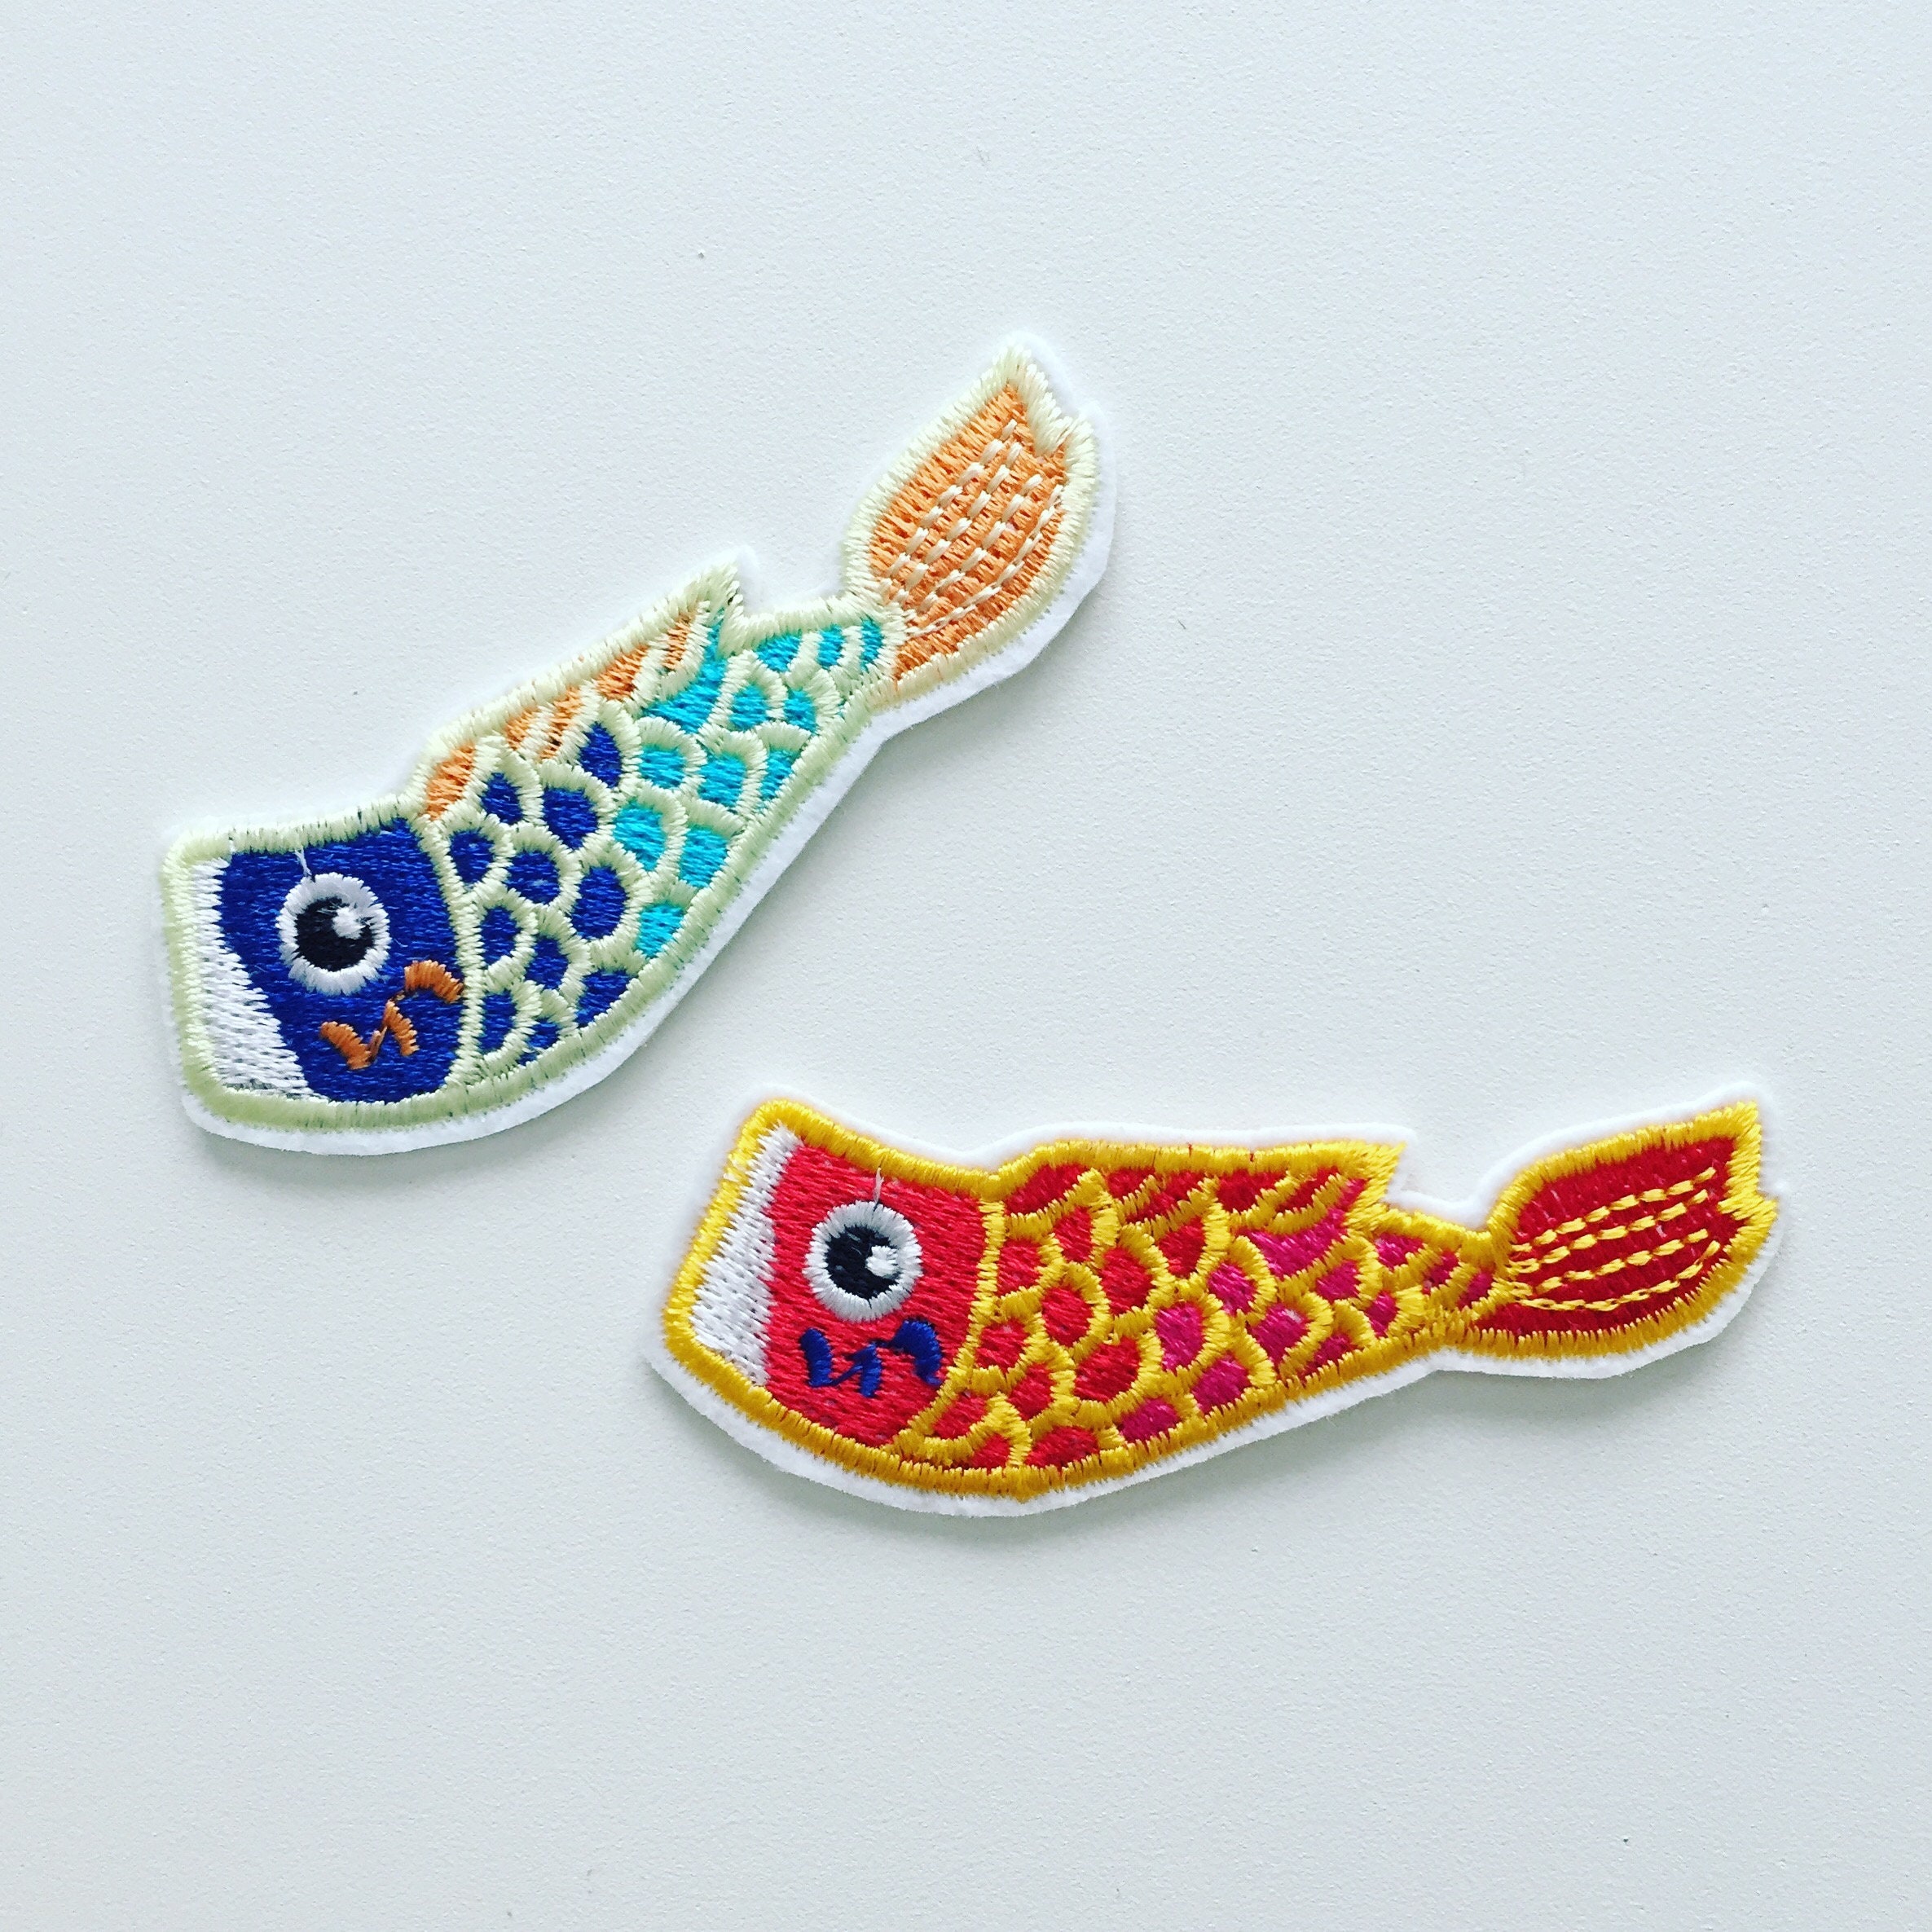 MASSIVE Japanese Koi Fish Statement Iron on Embroidered Patch Big Koi Lotus  Embroidery Patch for Clothes, Jackets, Backpacks Koi Patch 38 